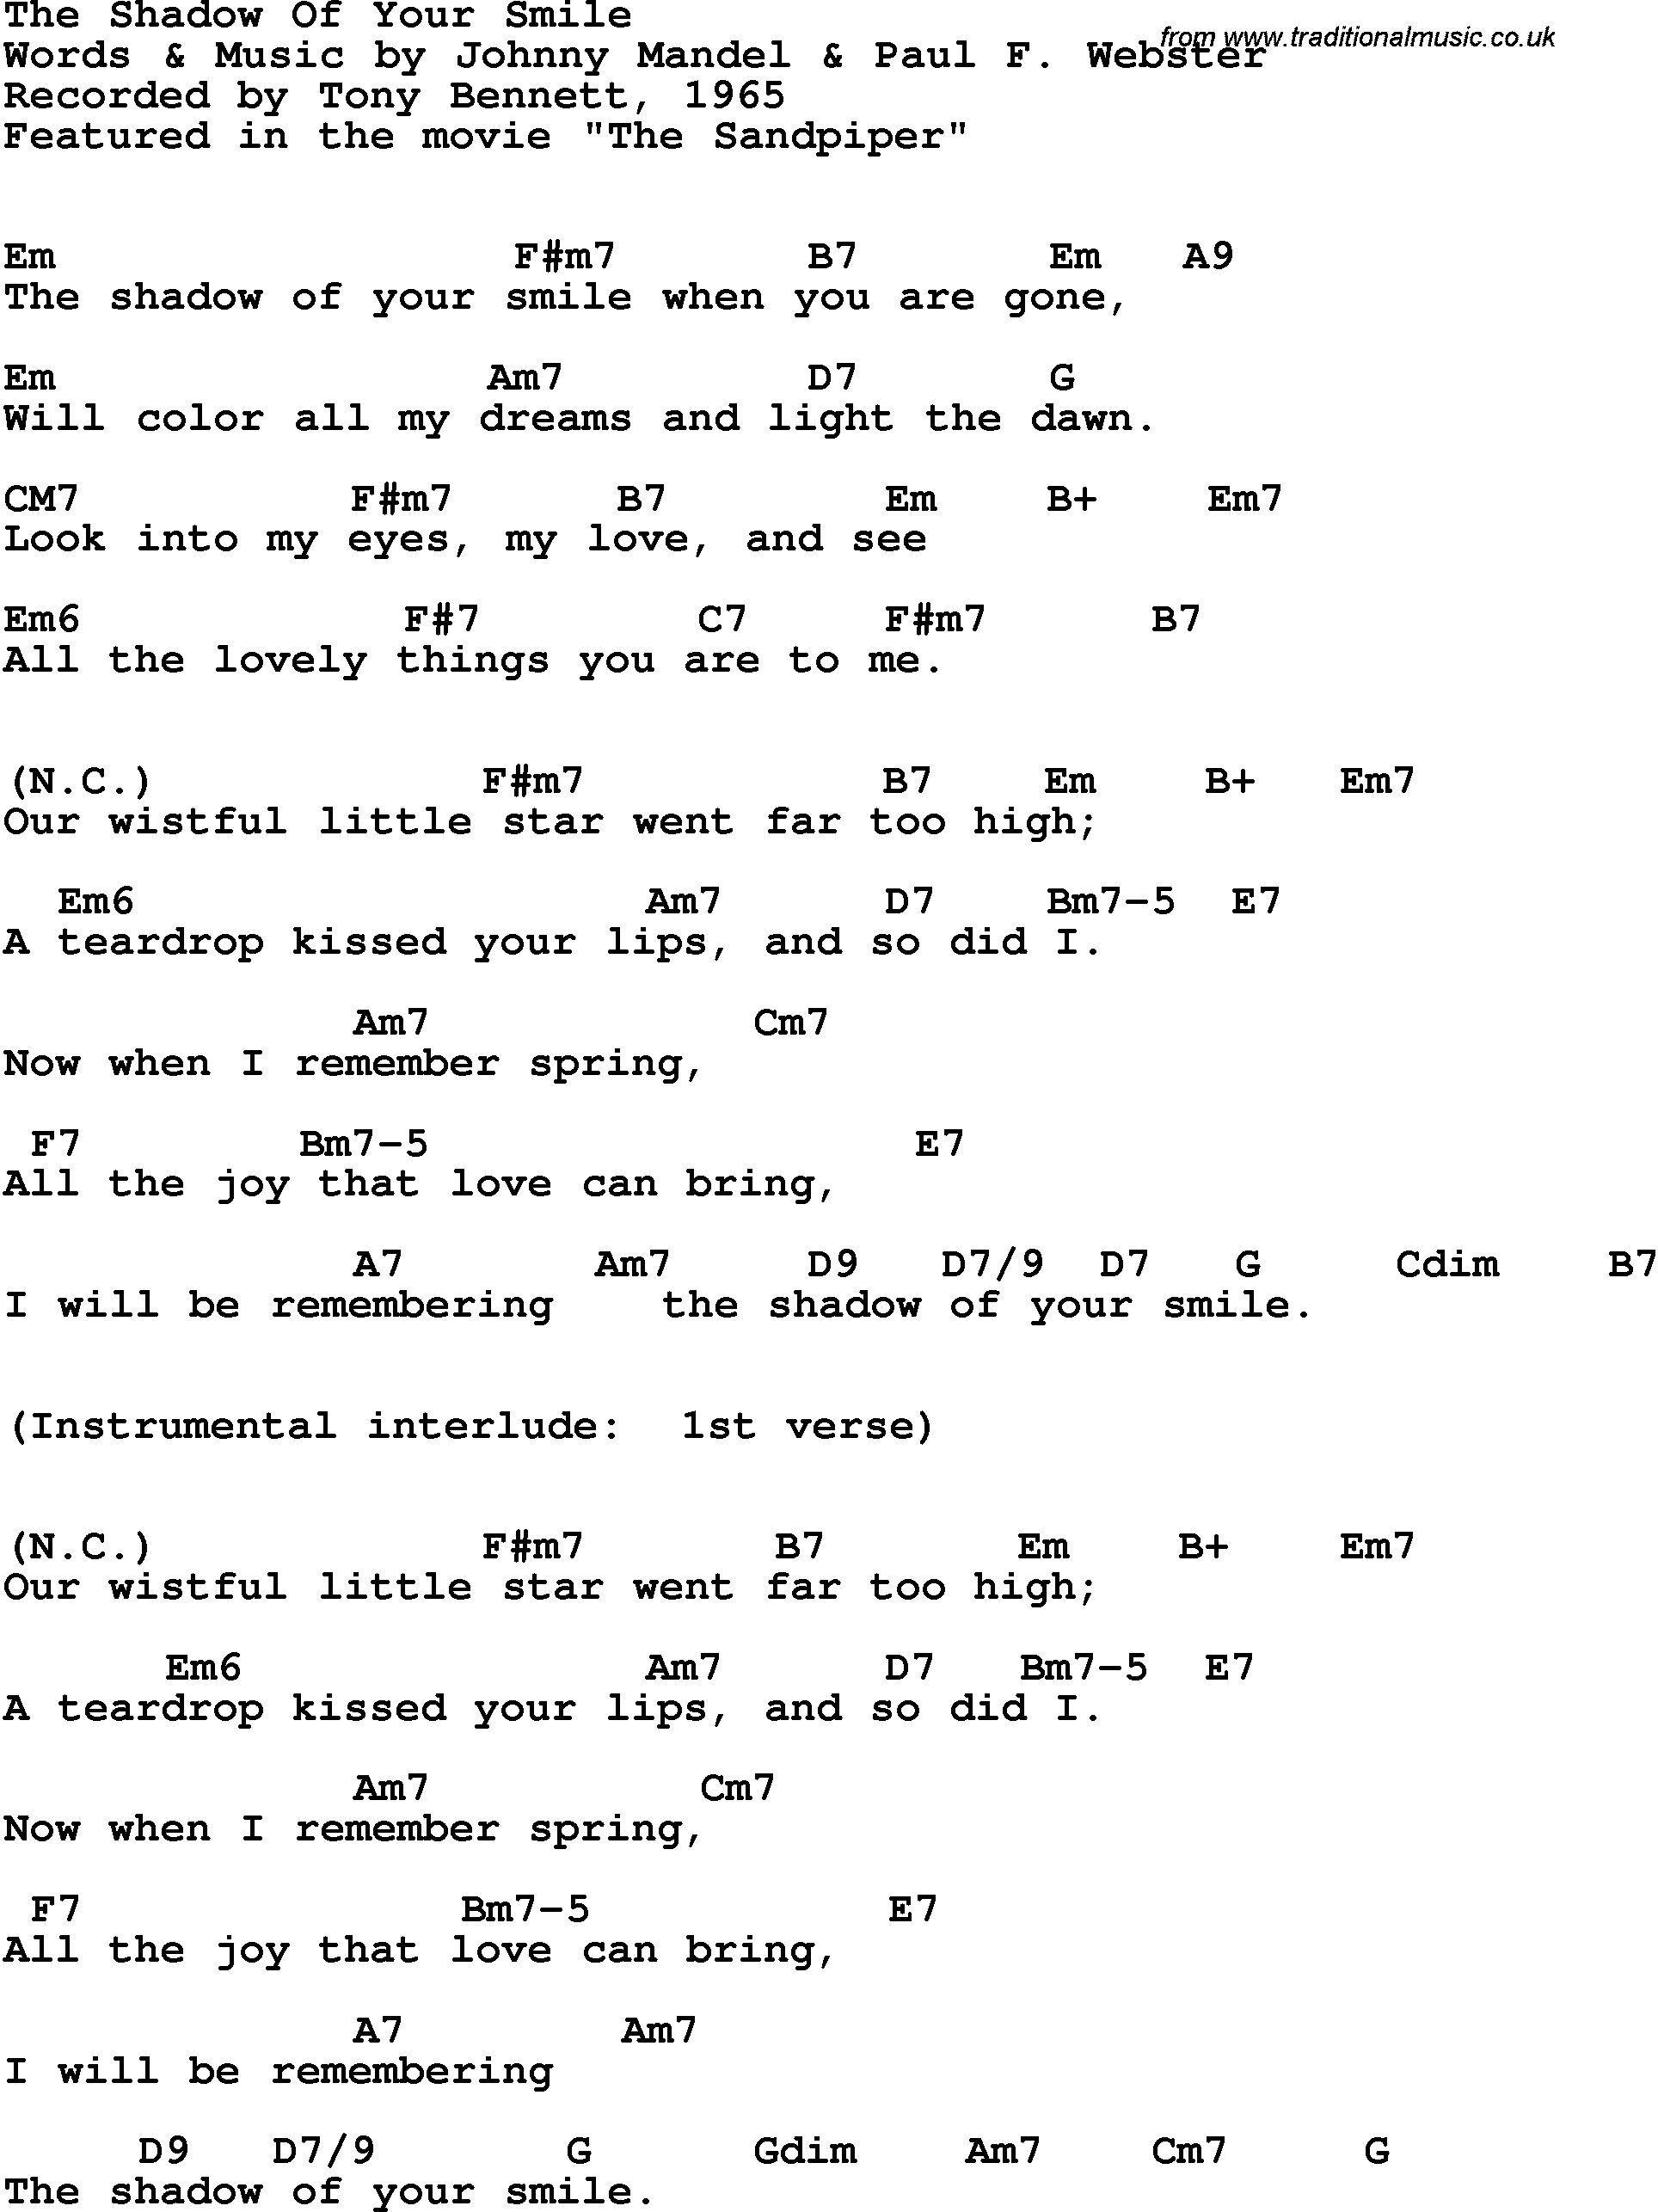 Song Lyrics with guitar chords for Shadow Of Your Smile, The - Tony Bennett, 1965